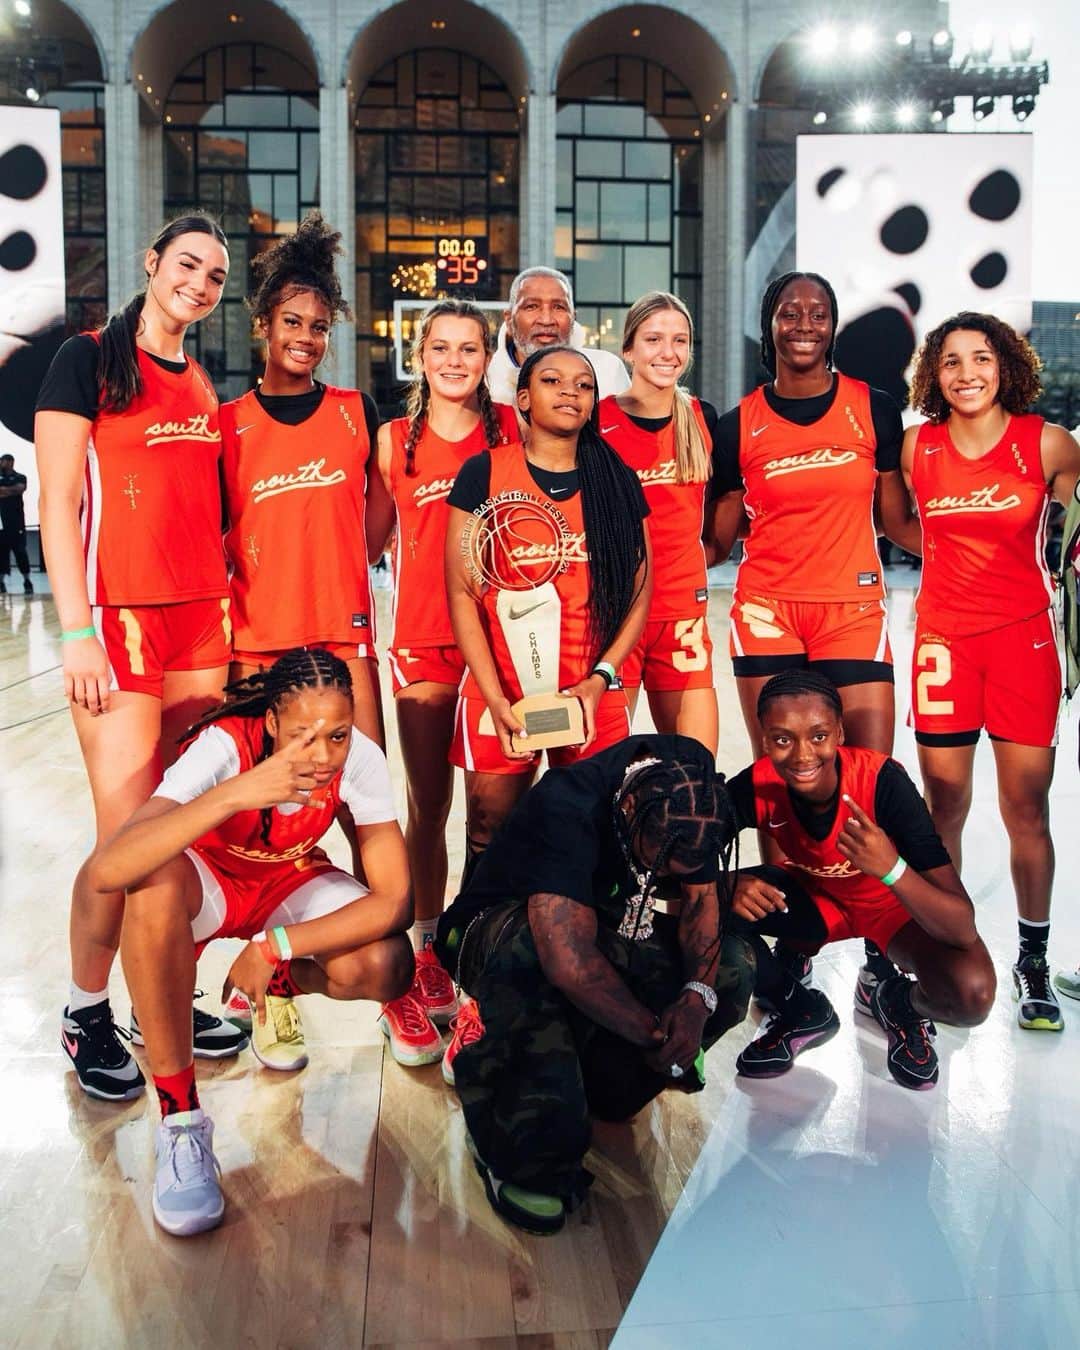 NikeNYCのインスタグラム：「CROWN THE CHAMPS 👑  The future of women’s hoops gave a valiant effort for the throne. Congrats to Team South for stamping their legacy at the 2023 Nike World Basketball Festival.  #OnlyBasketball」